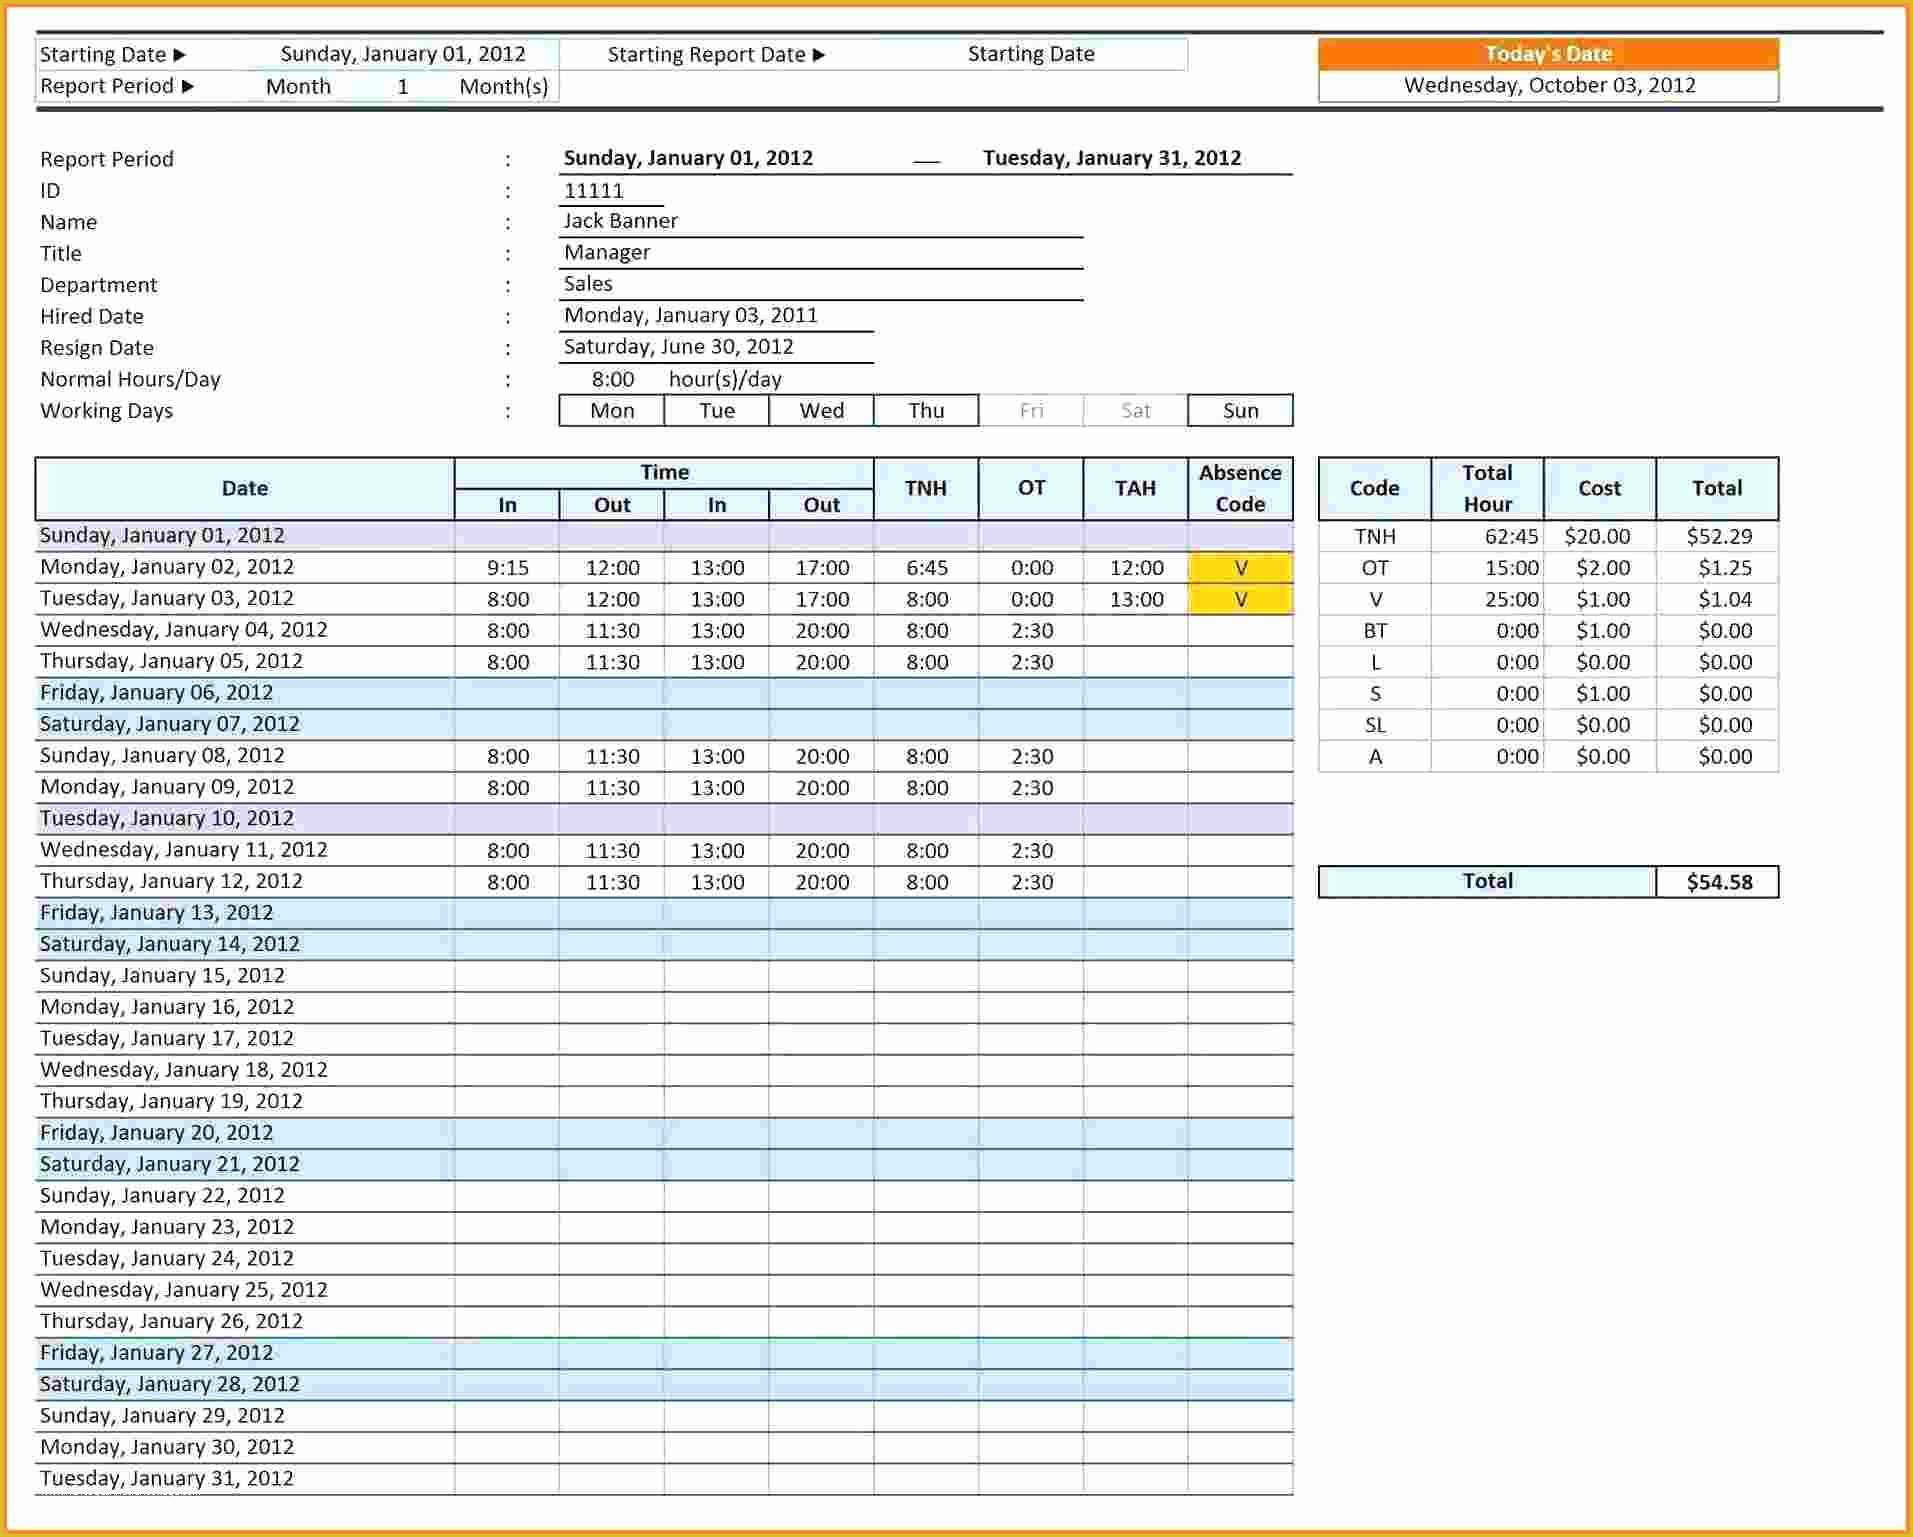 Free Annual Leave Spreadsheet Excel Template Of Free Annual Leave Spreadsheet Excel Templateee Annual